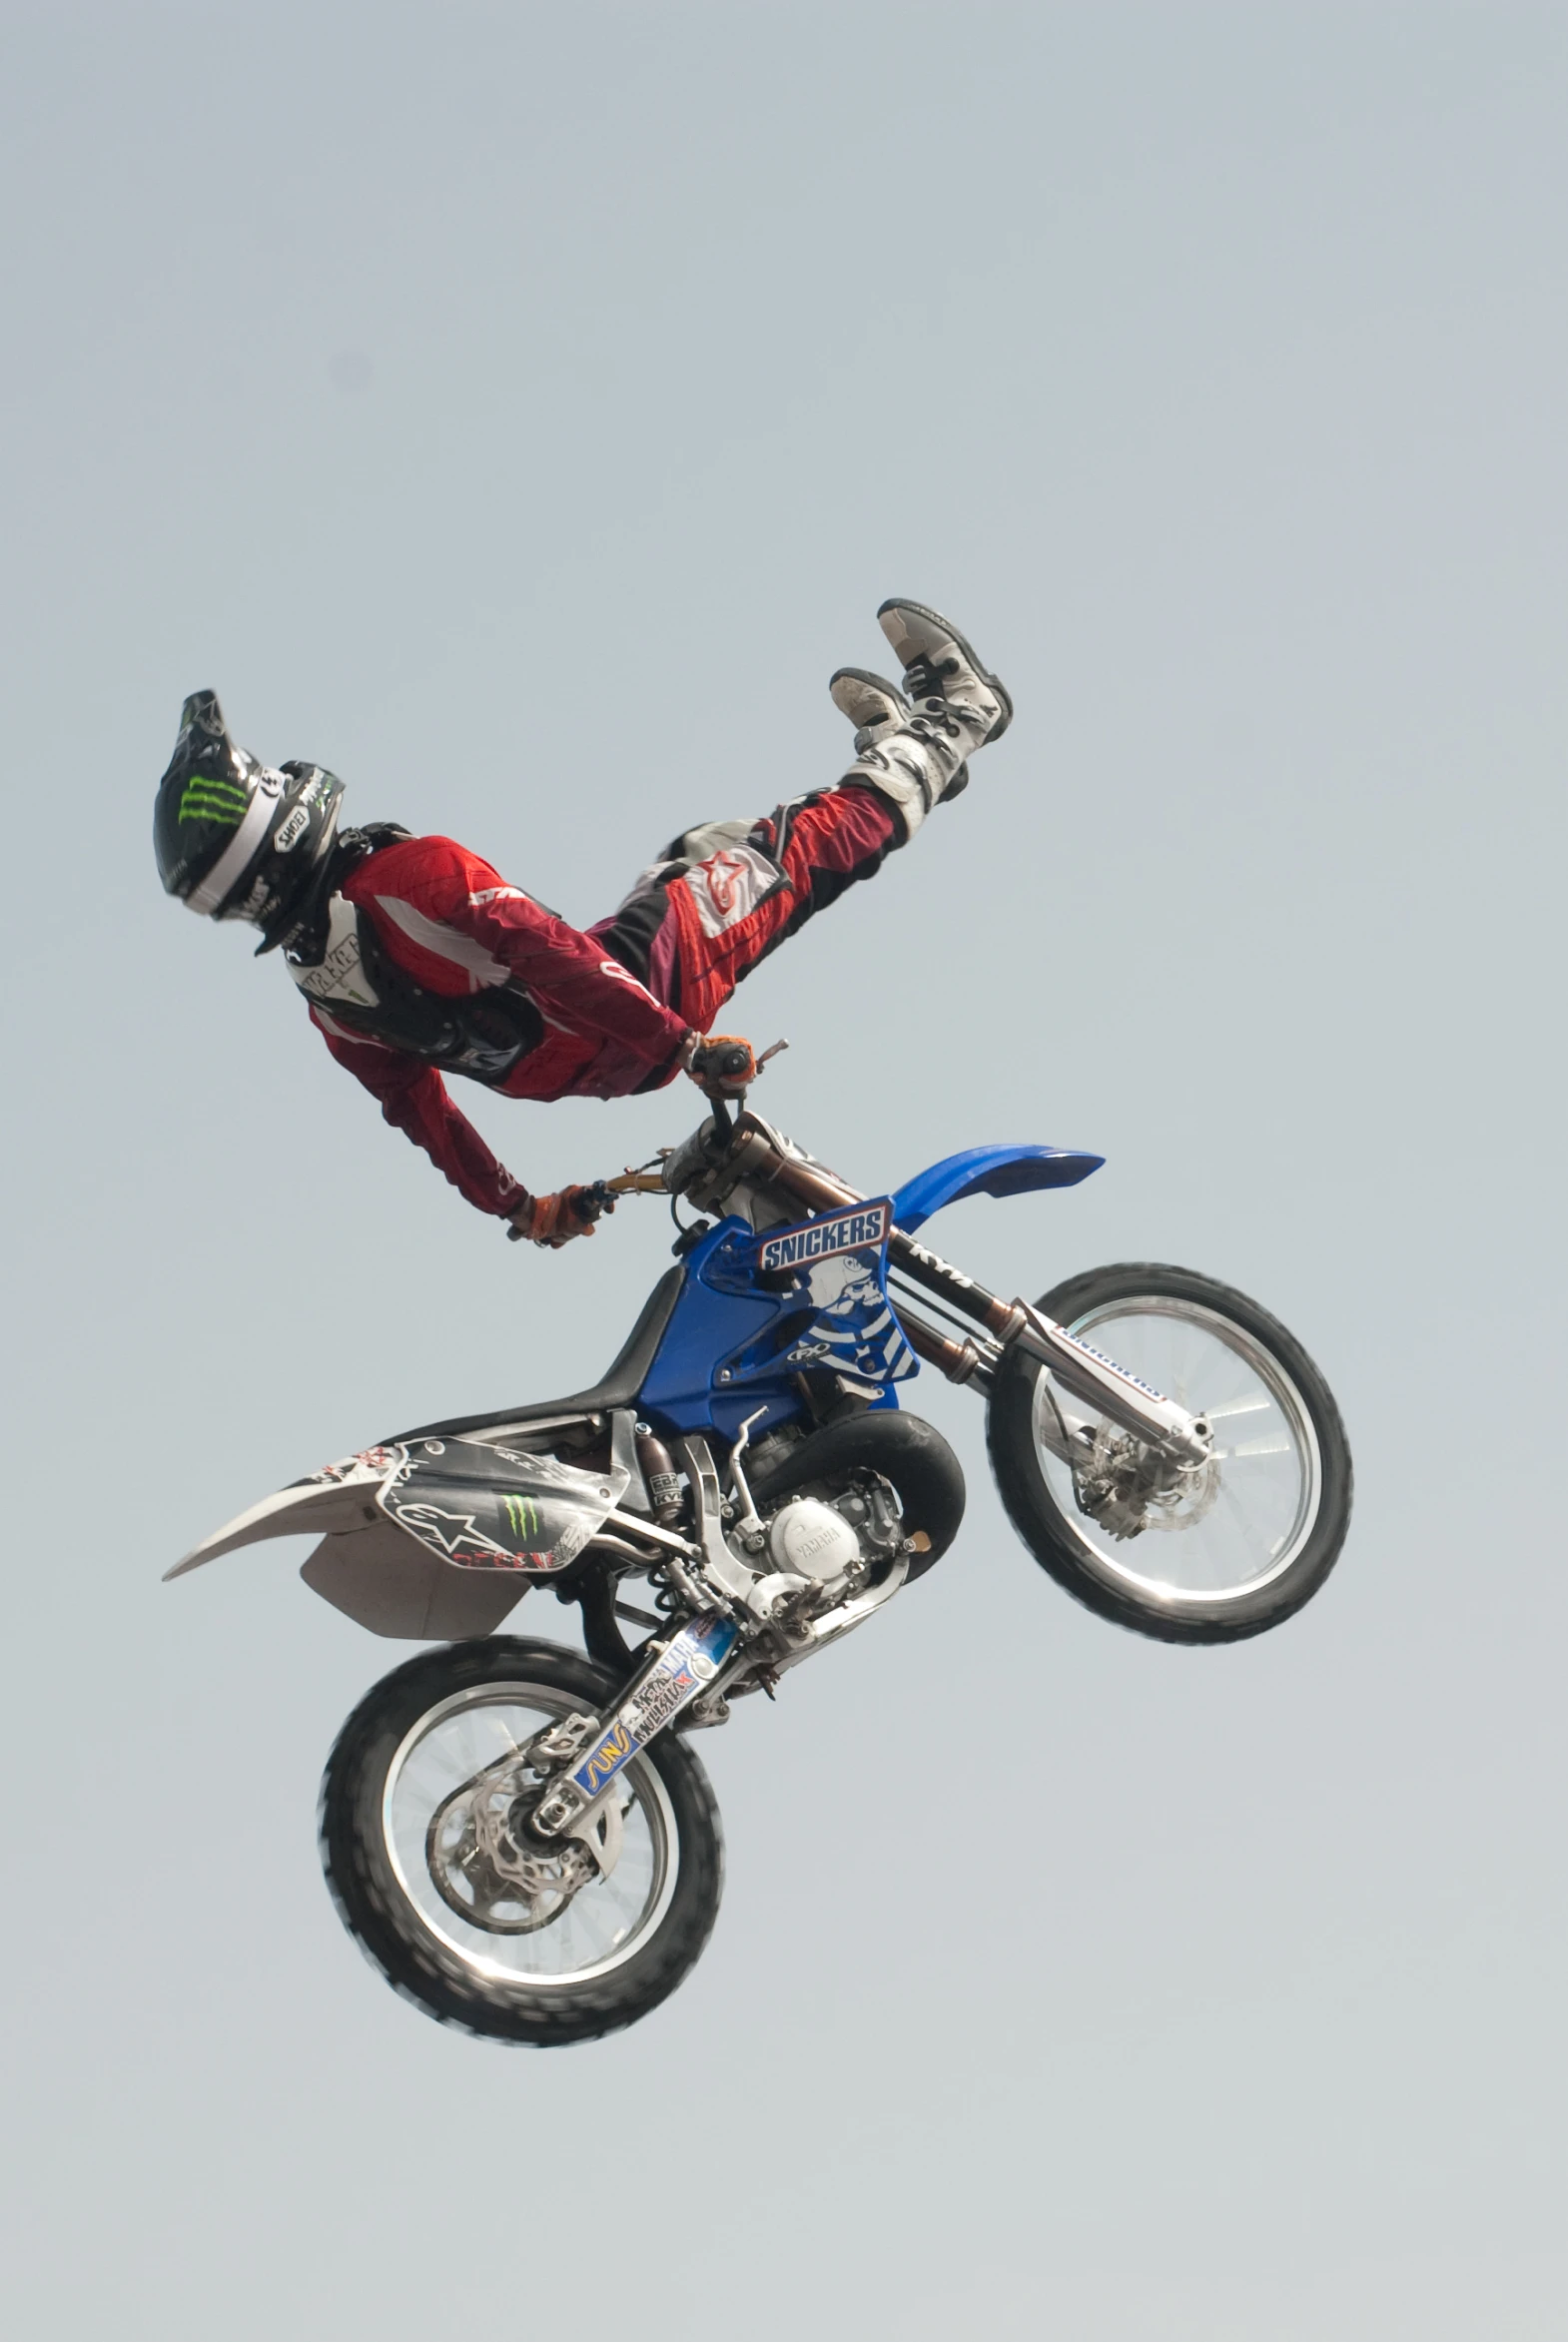 a man riding a dirt bike while being upside down